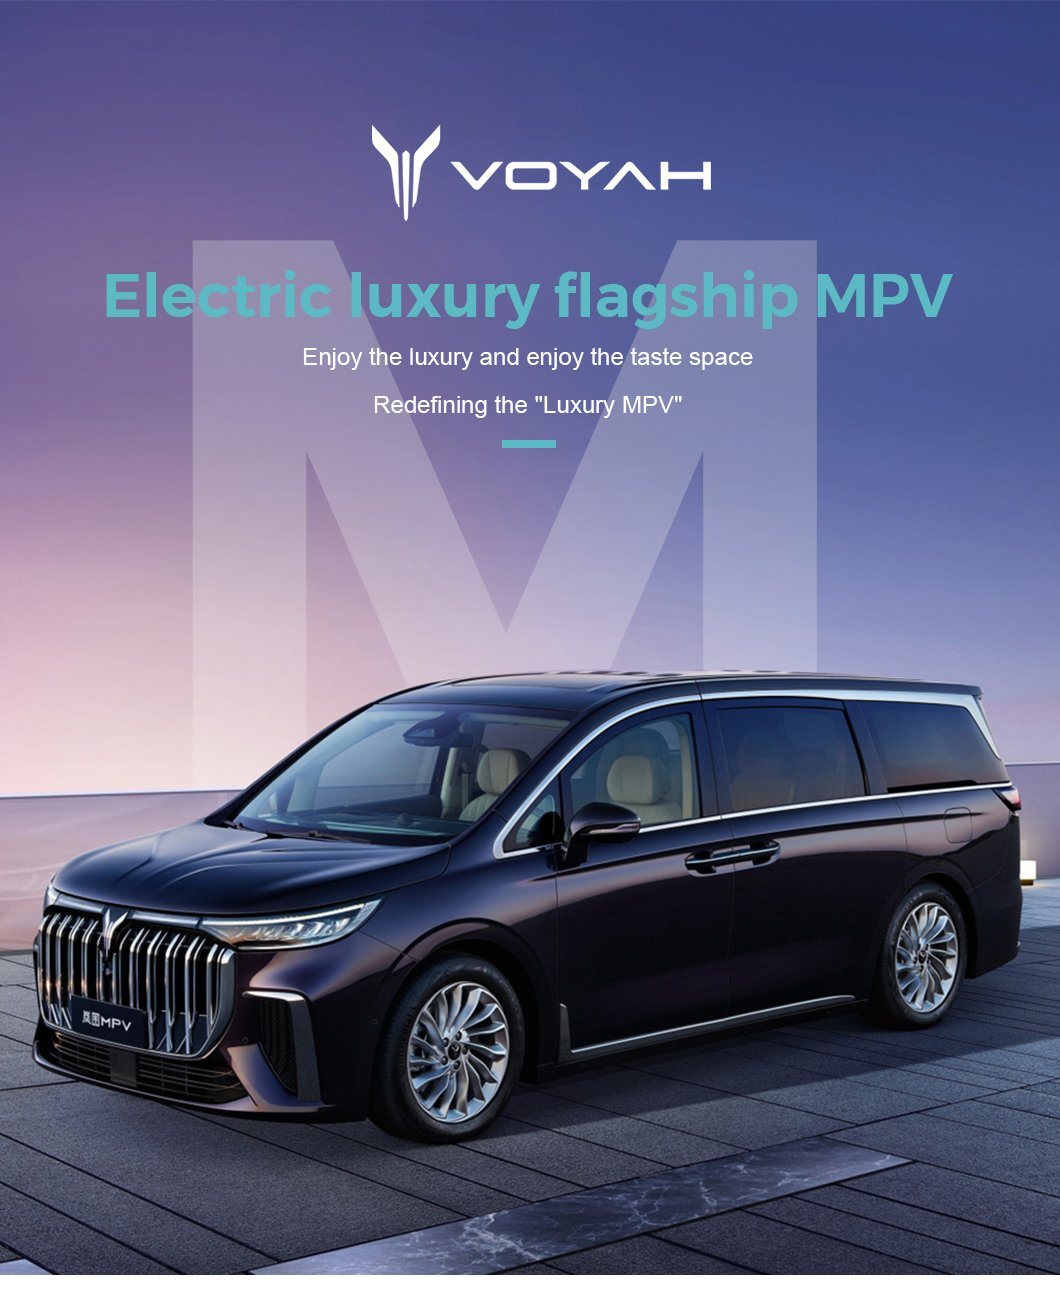 Electric Car Voyah Automobile Plug-in Hybrid Dreamer 2022 Low Carbon Edition Home Electric Car Adult Extra Large Space EV Car